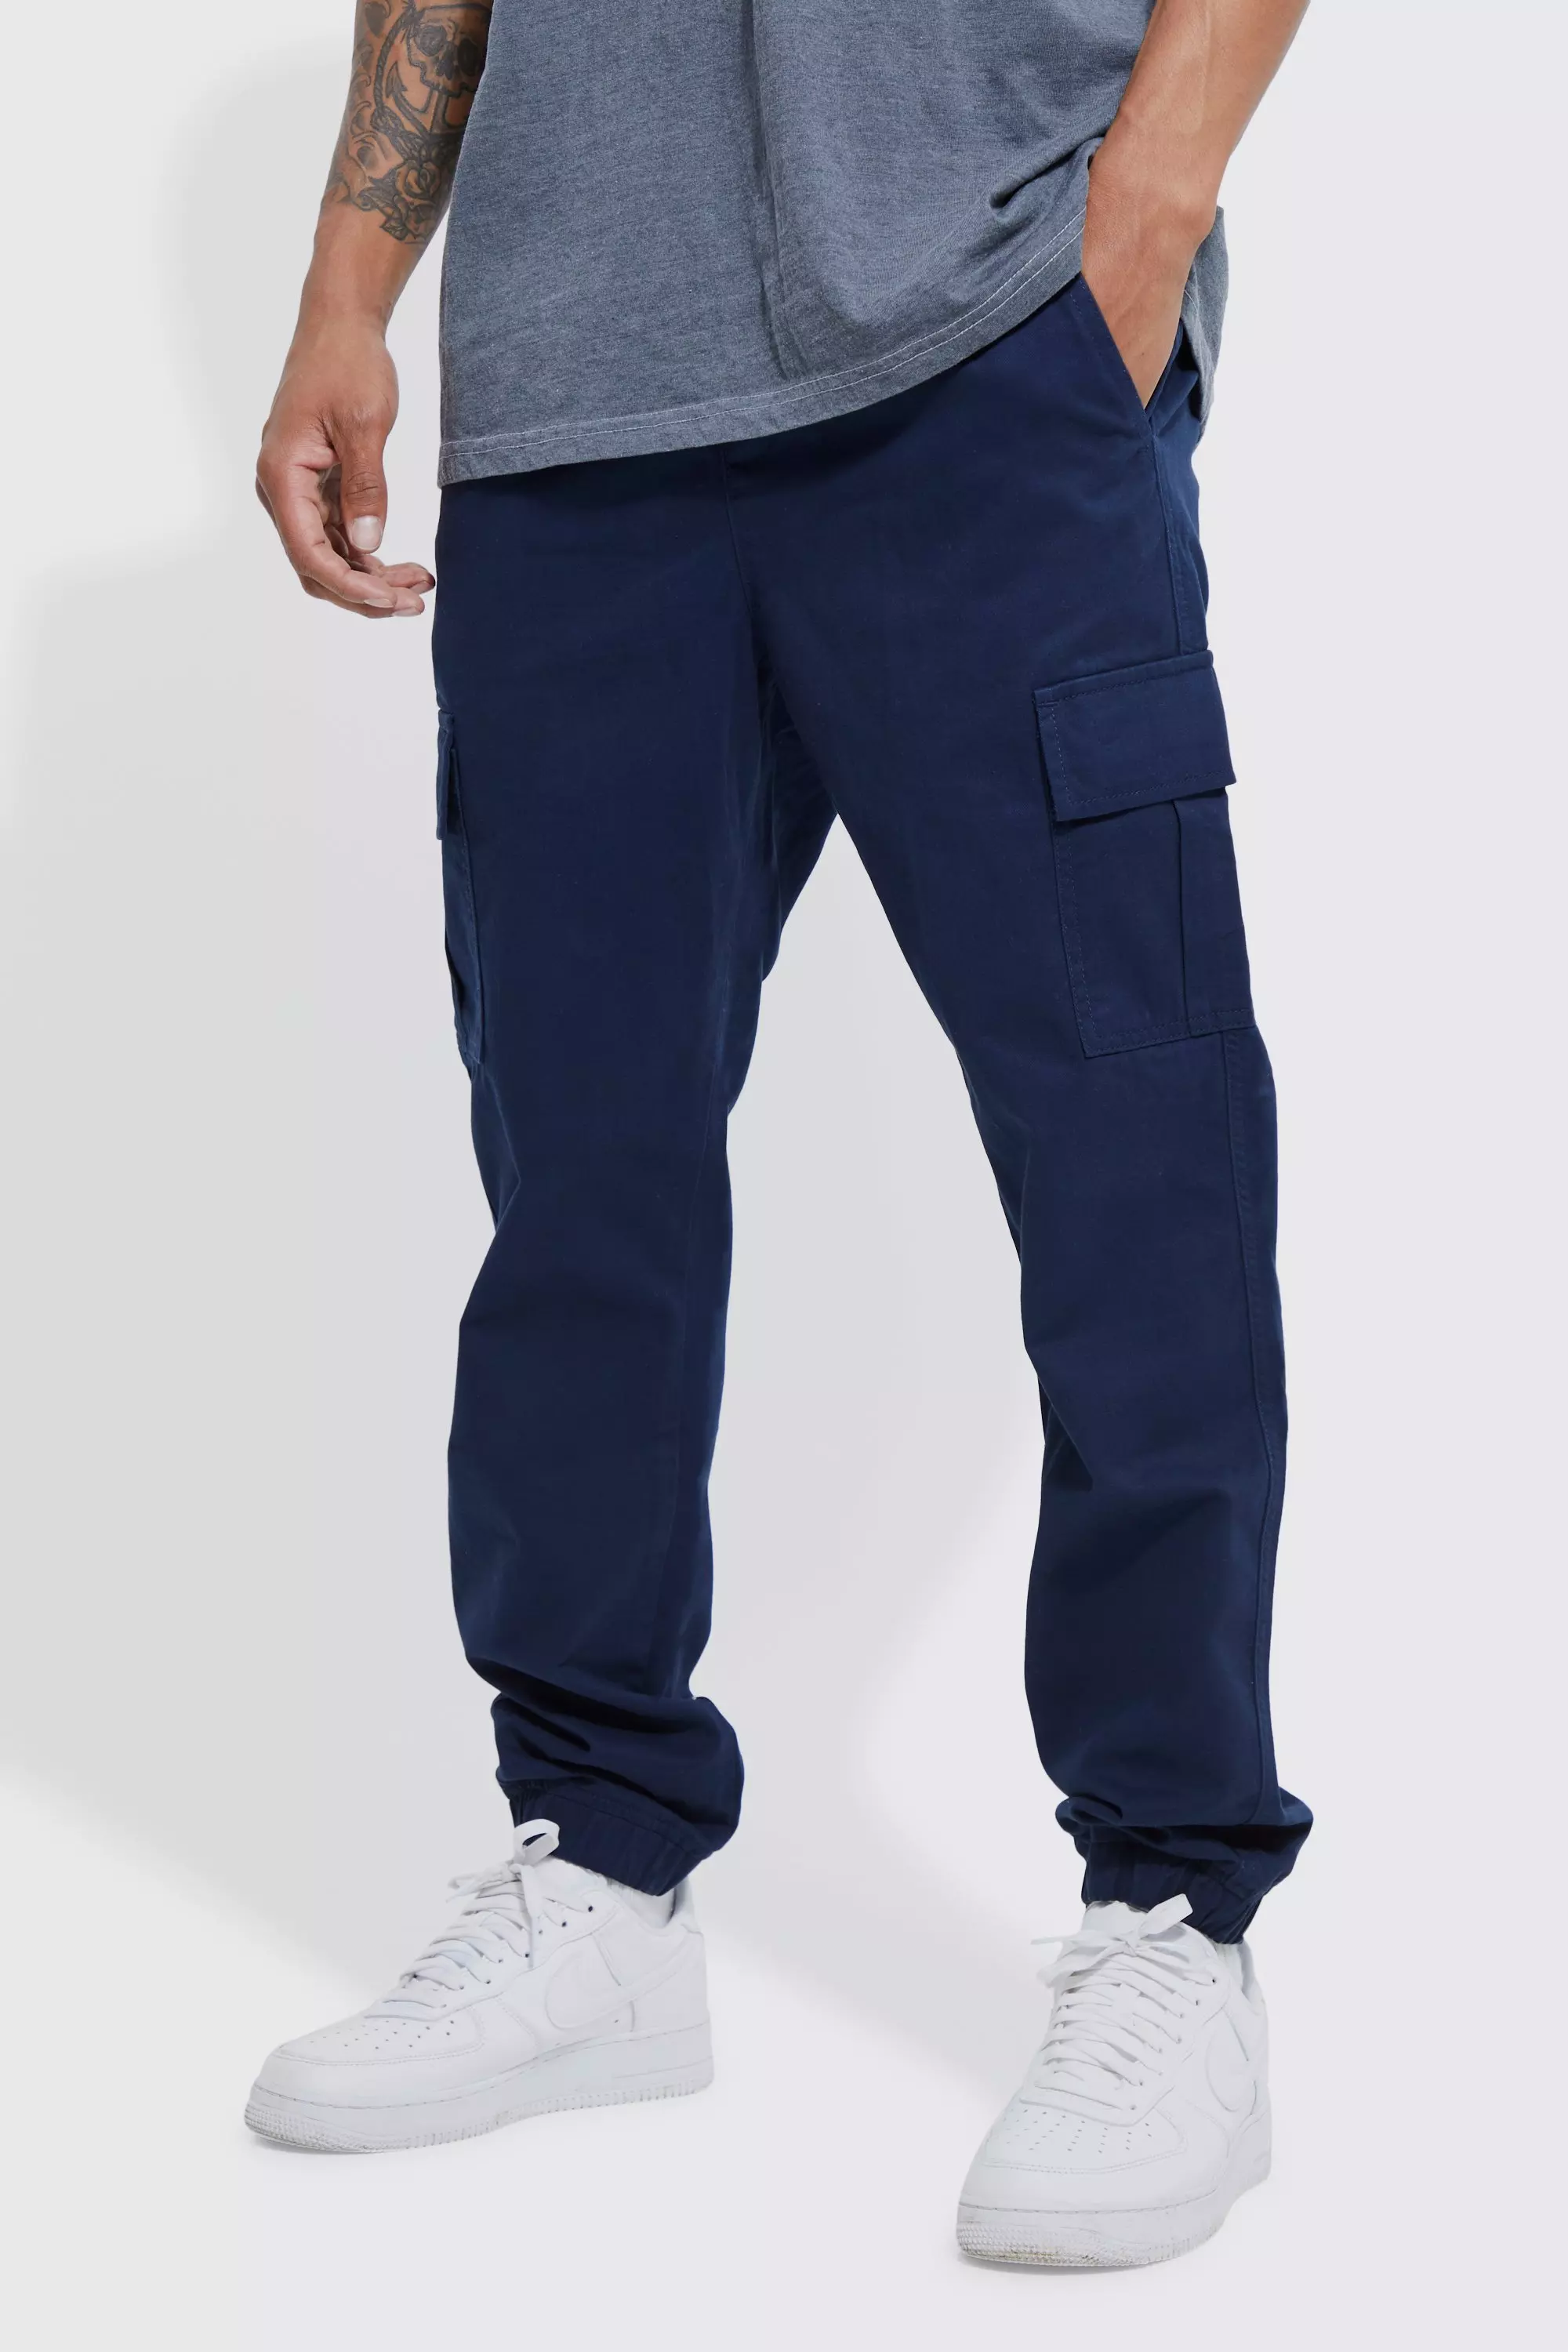 Styling Navy Blue Cargos from @s_gents Which fit are you rocking? #me, Cargos